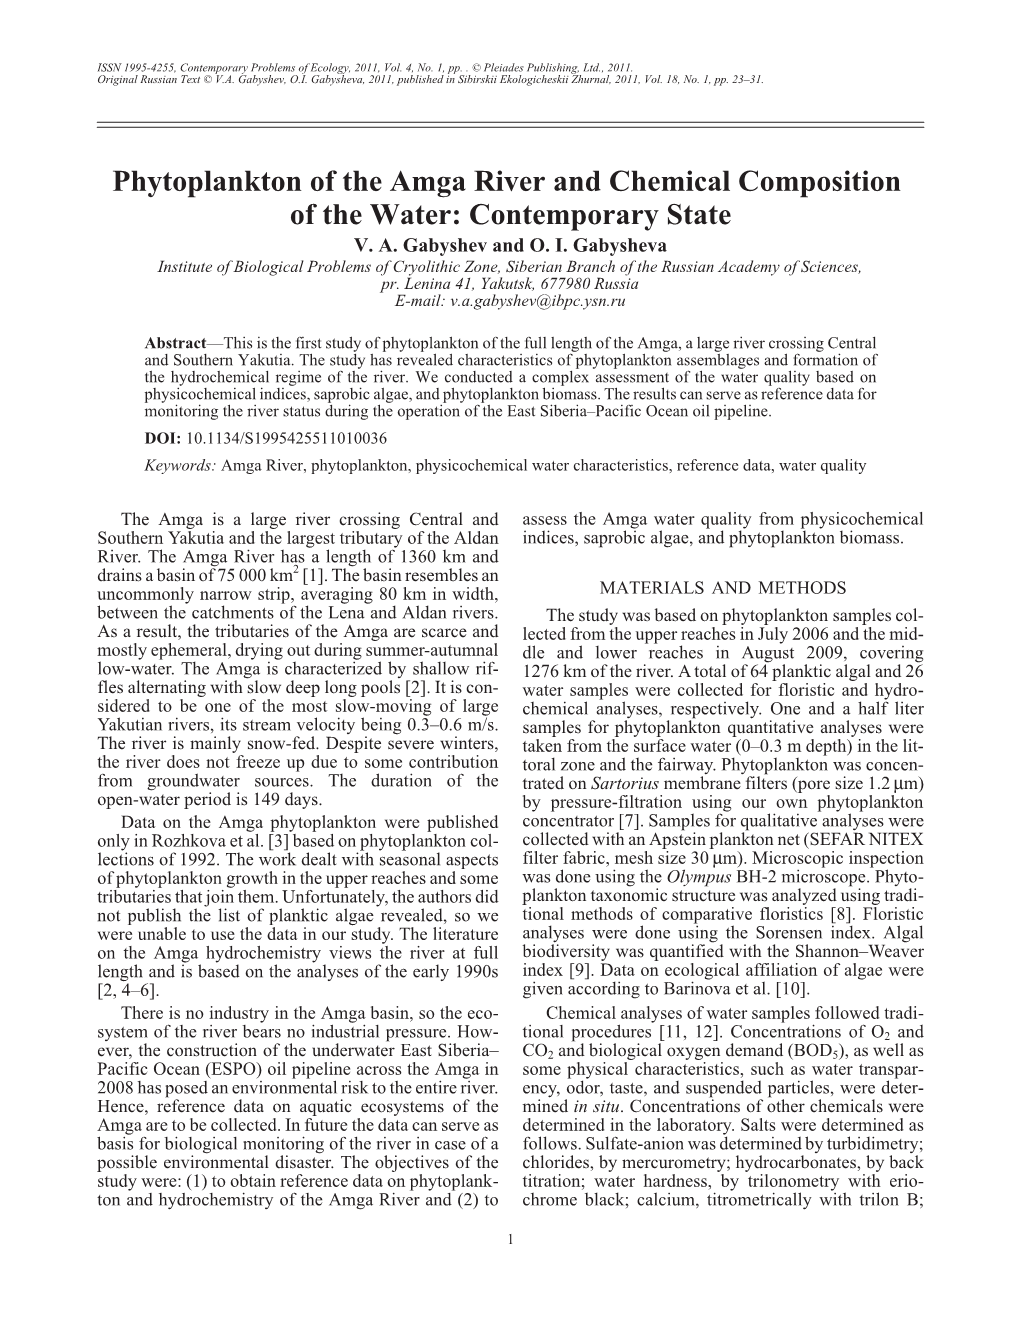 Phytoplankton of the Amga River and Chemical Composition of the Water: Contemporary State V